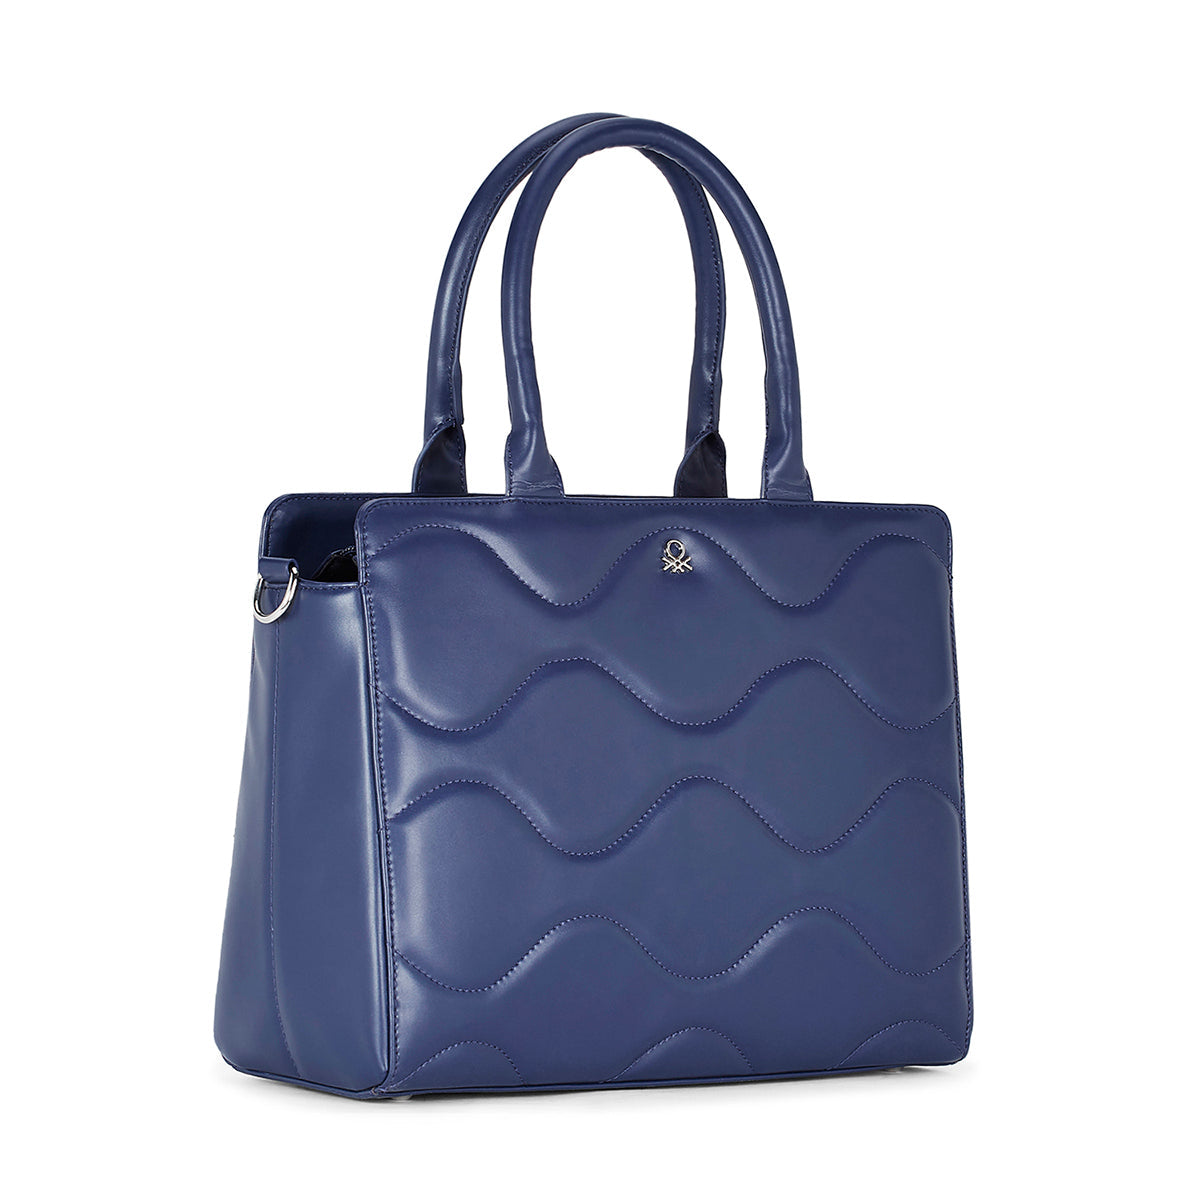 United Colors of Benetton Camilla Woman's PU Tote-Navy